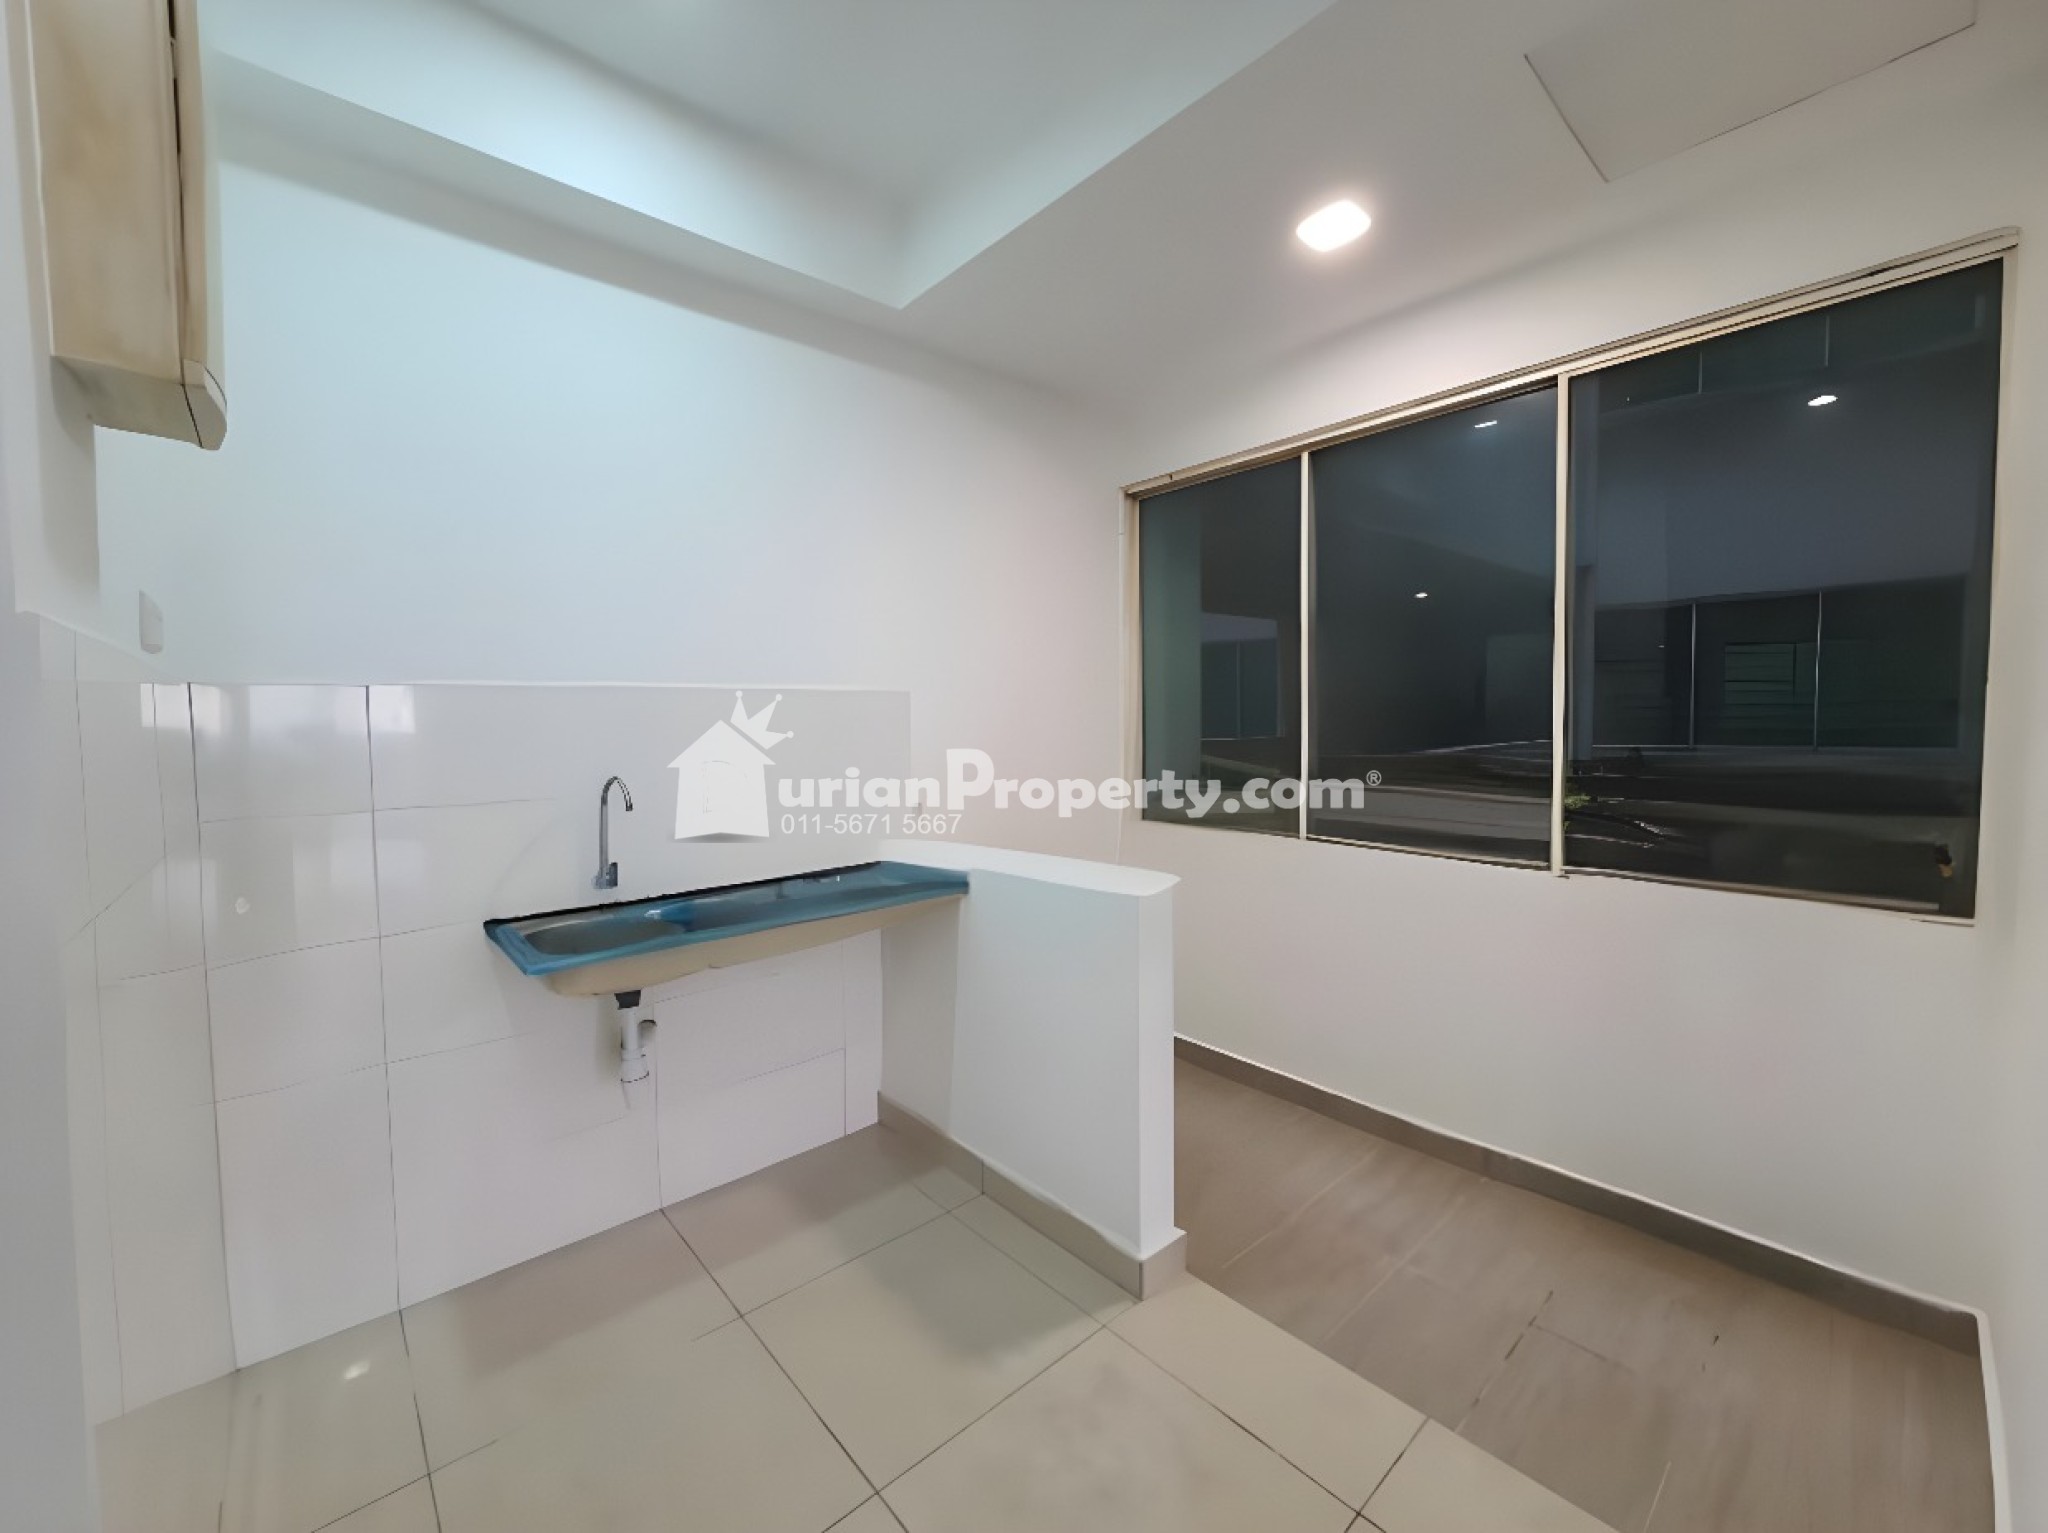 Condo For Sale at Zenith Residences